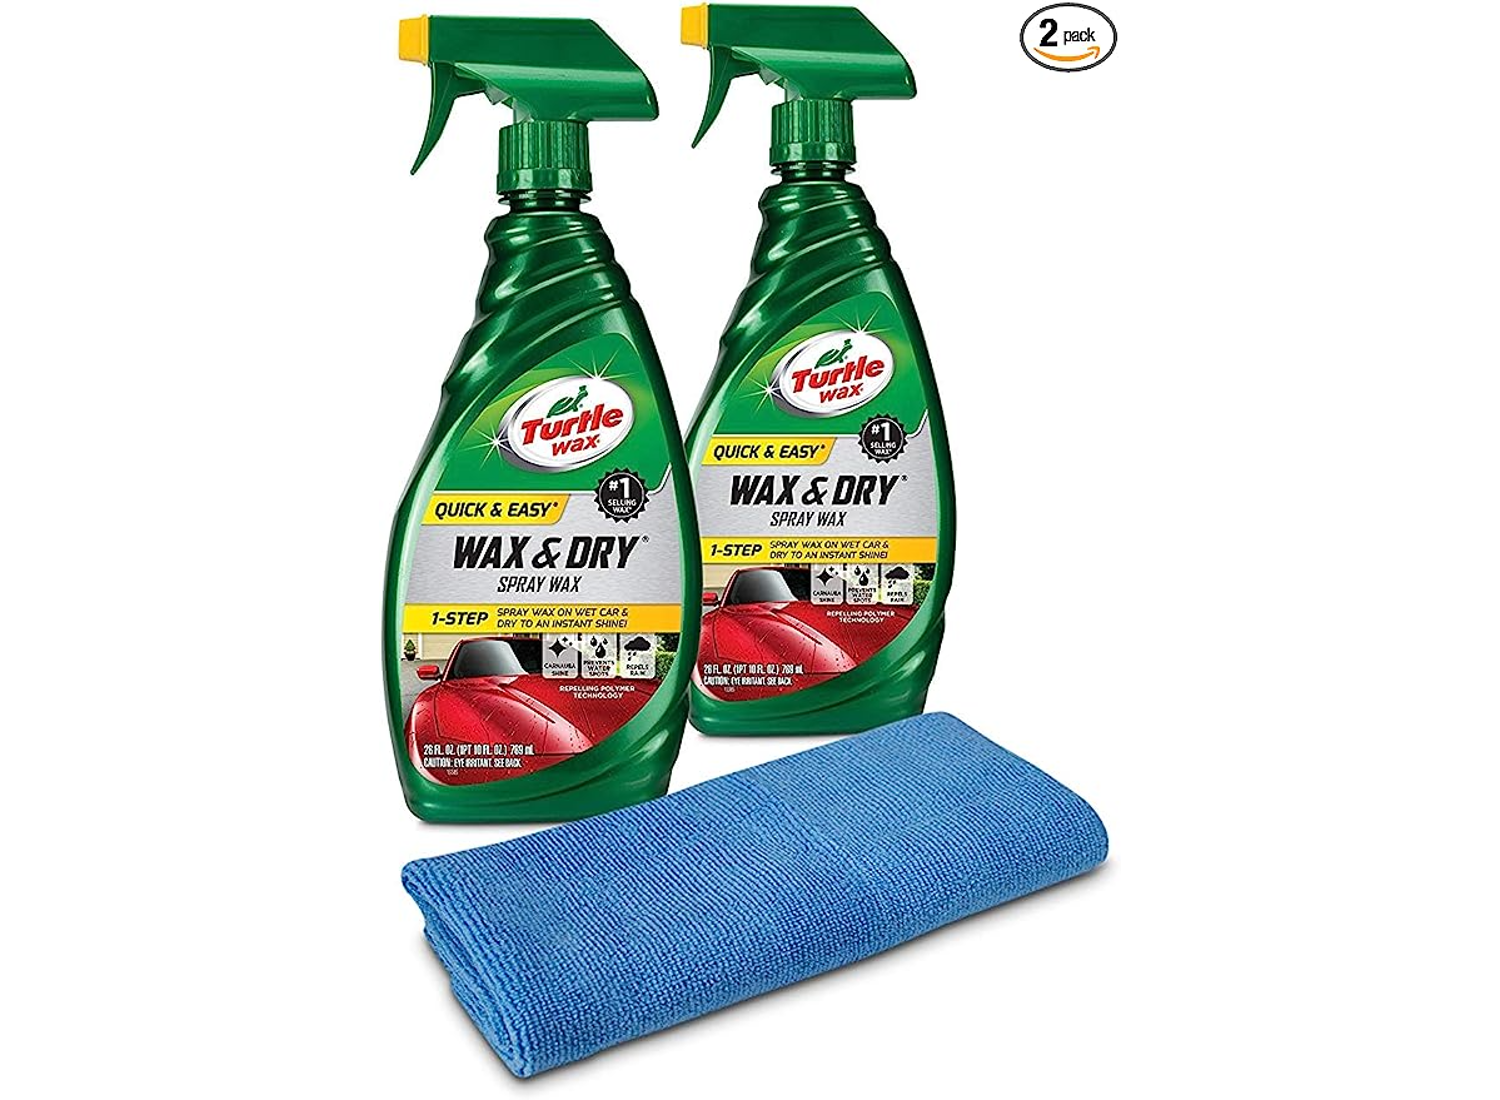 Two green spray bottles of Turtle car wax next to a microfiber cloth on a white background